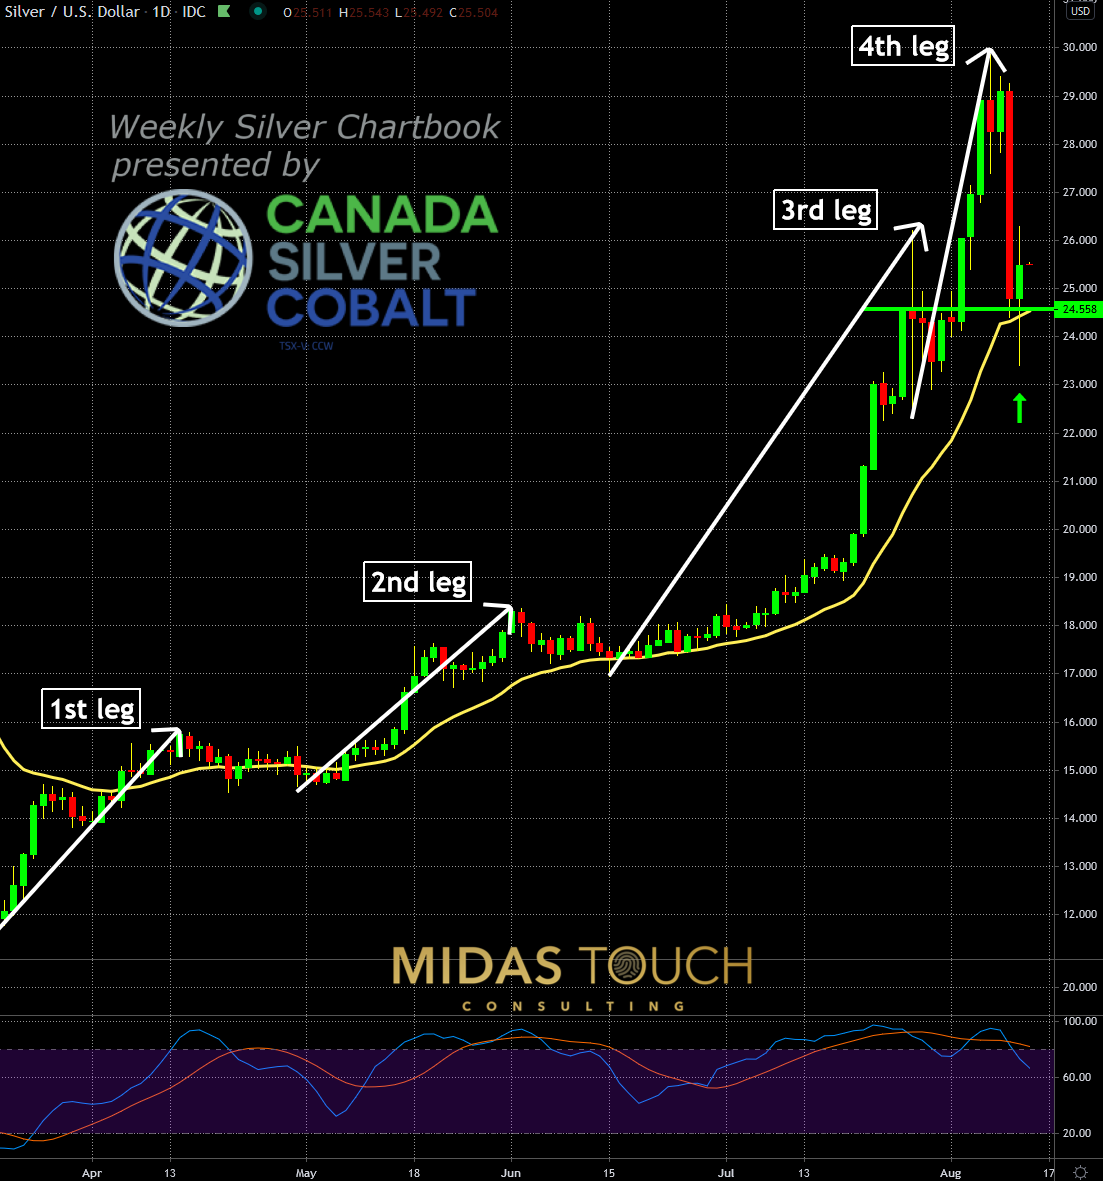 Silver in US-Dollar, daily chart as of August 13th, 2020.